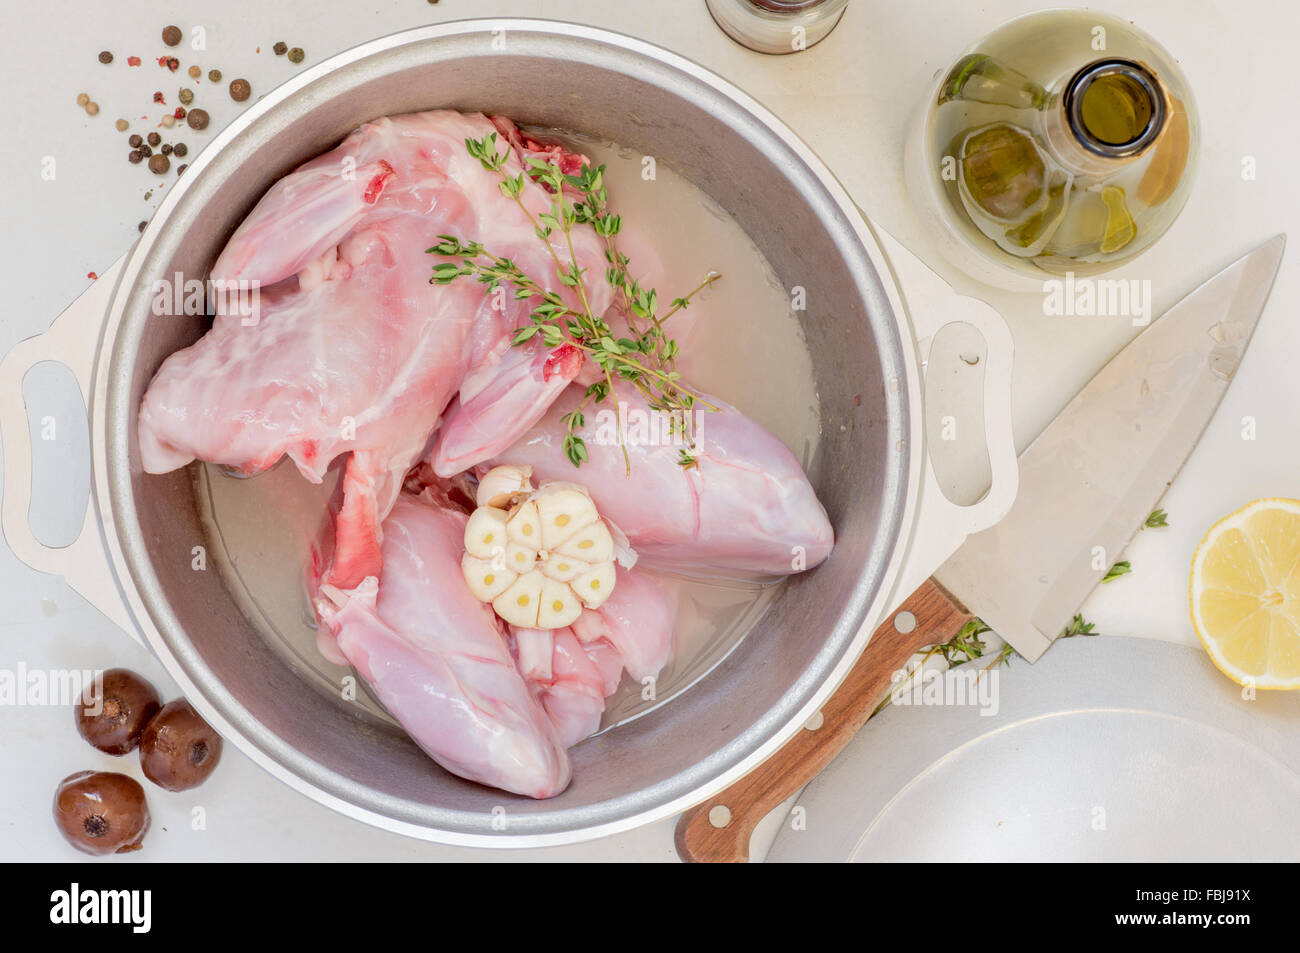 Stewed rabbit in white wine cook at home Stock Photo